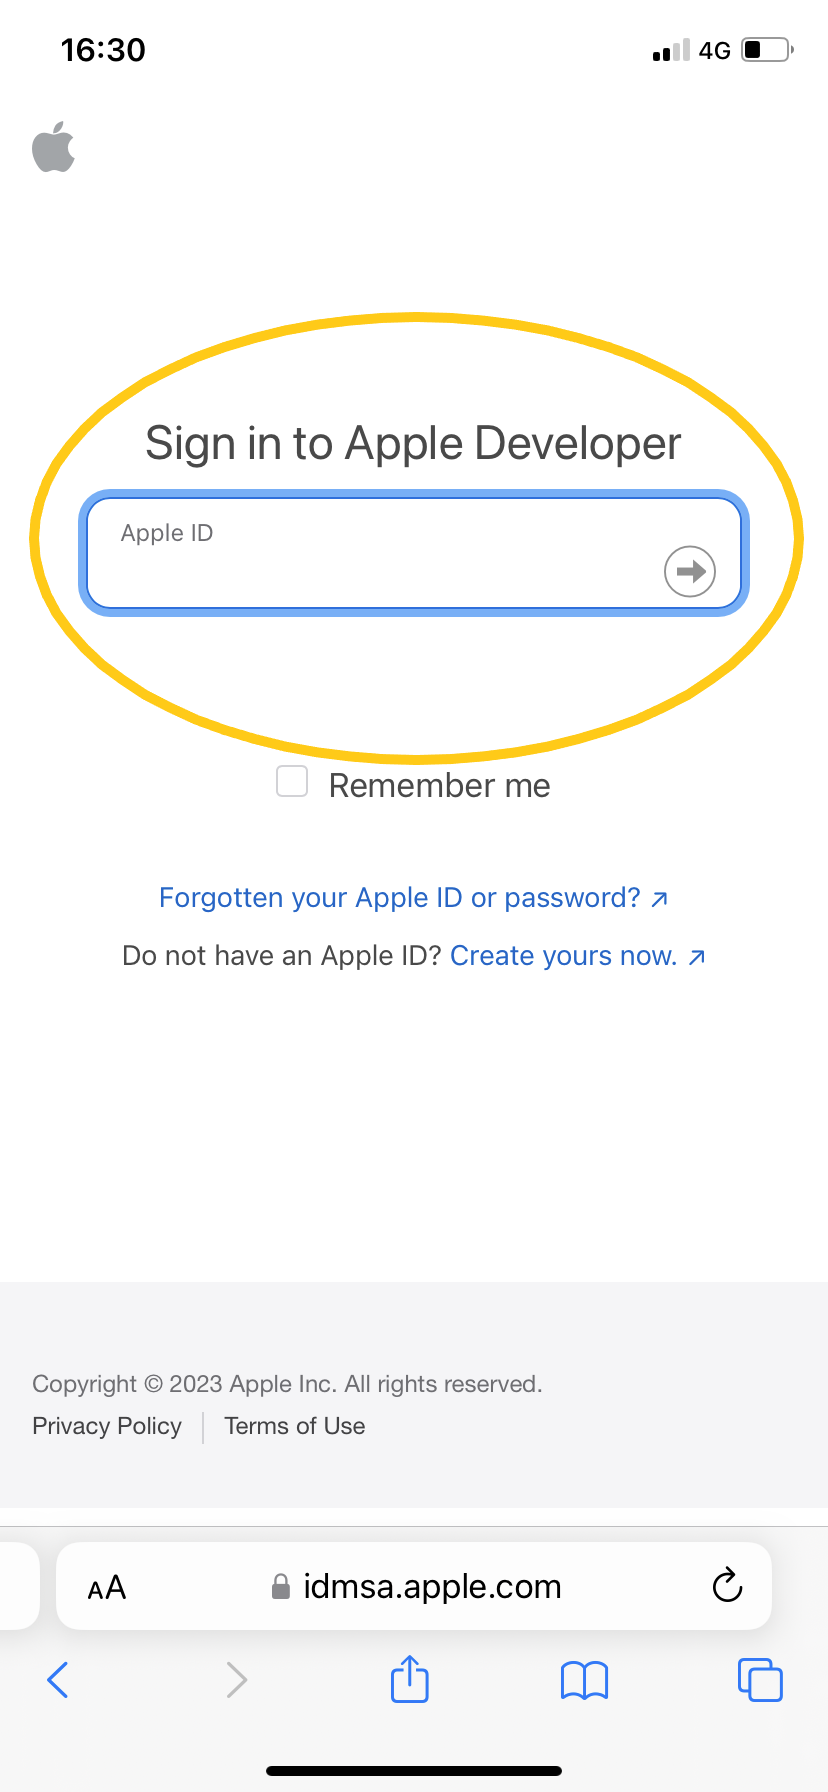 How to sign up for an Apple Developer Account 2